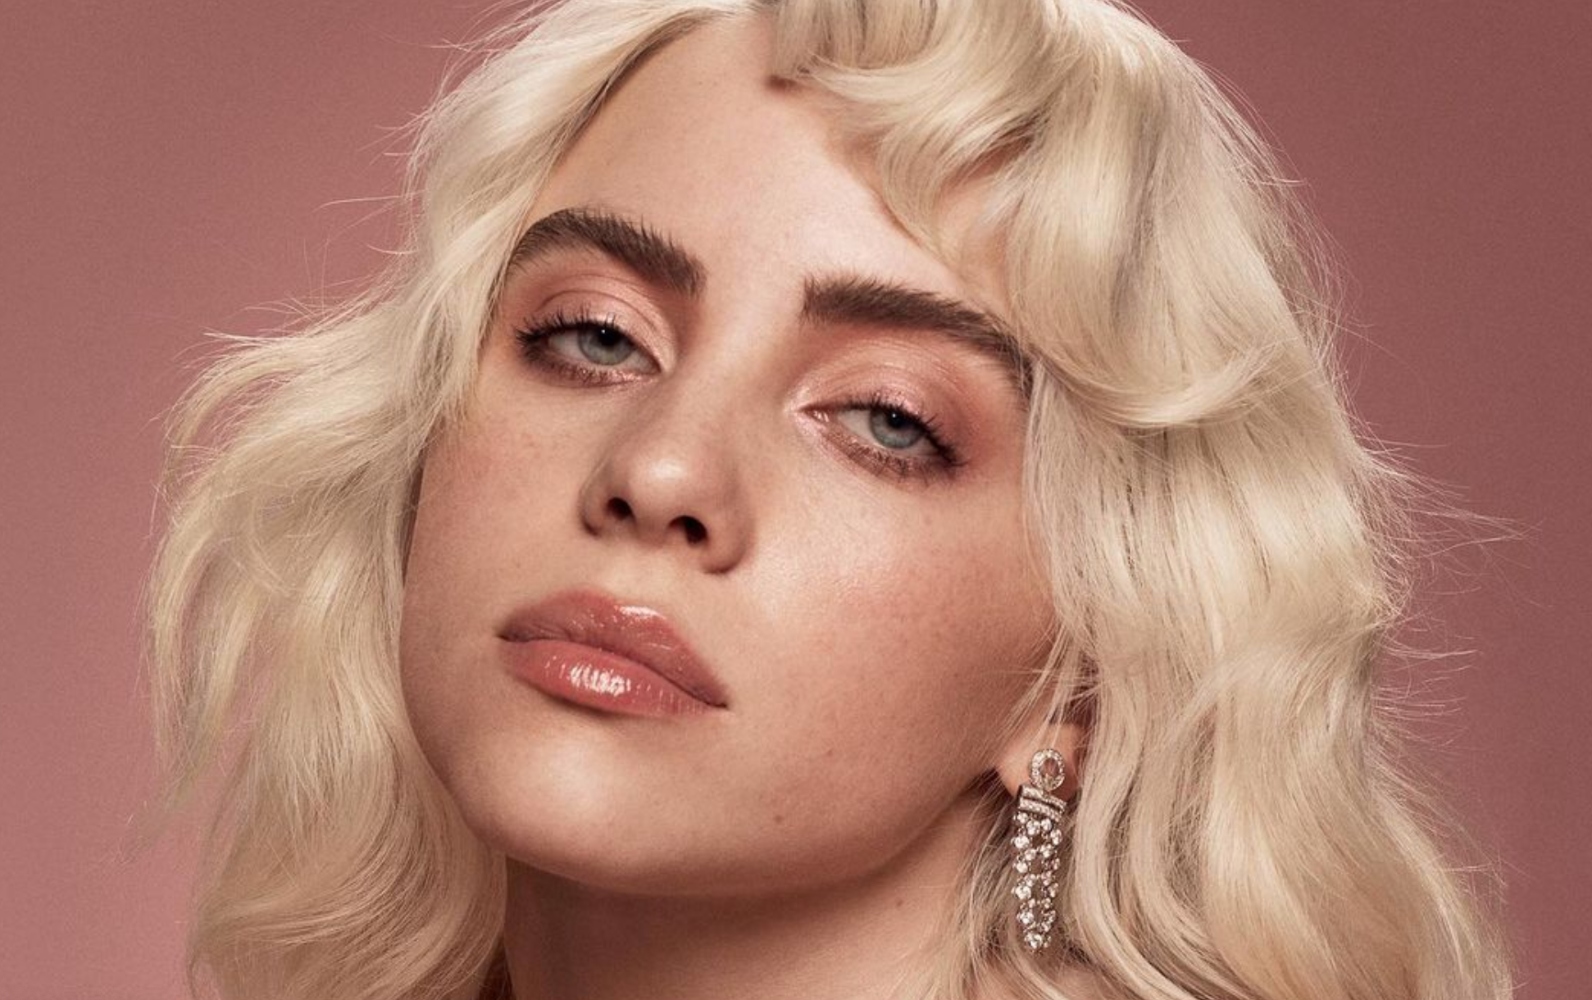 Billie Eilish Never Wants To Post Again After Vogue Cover